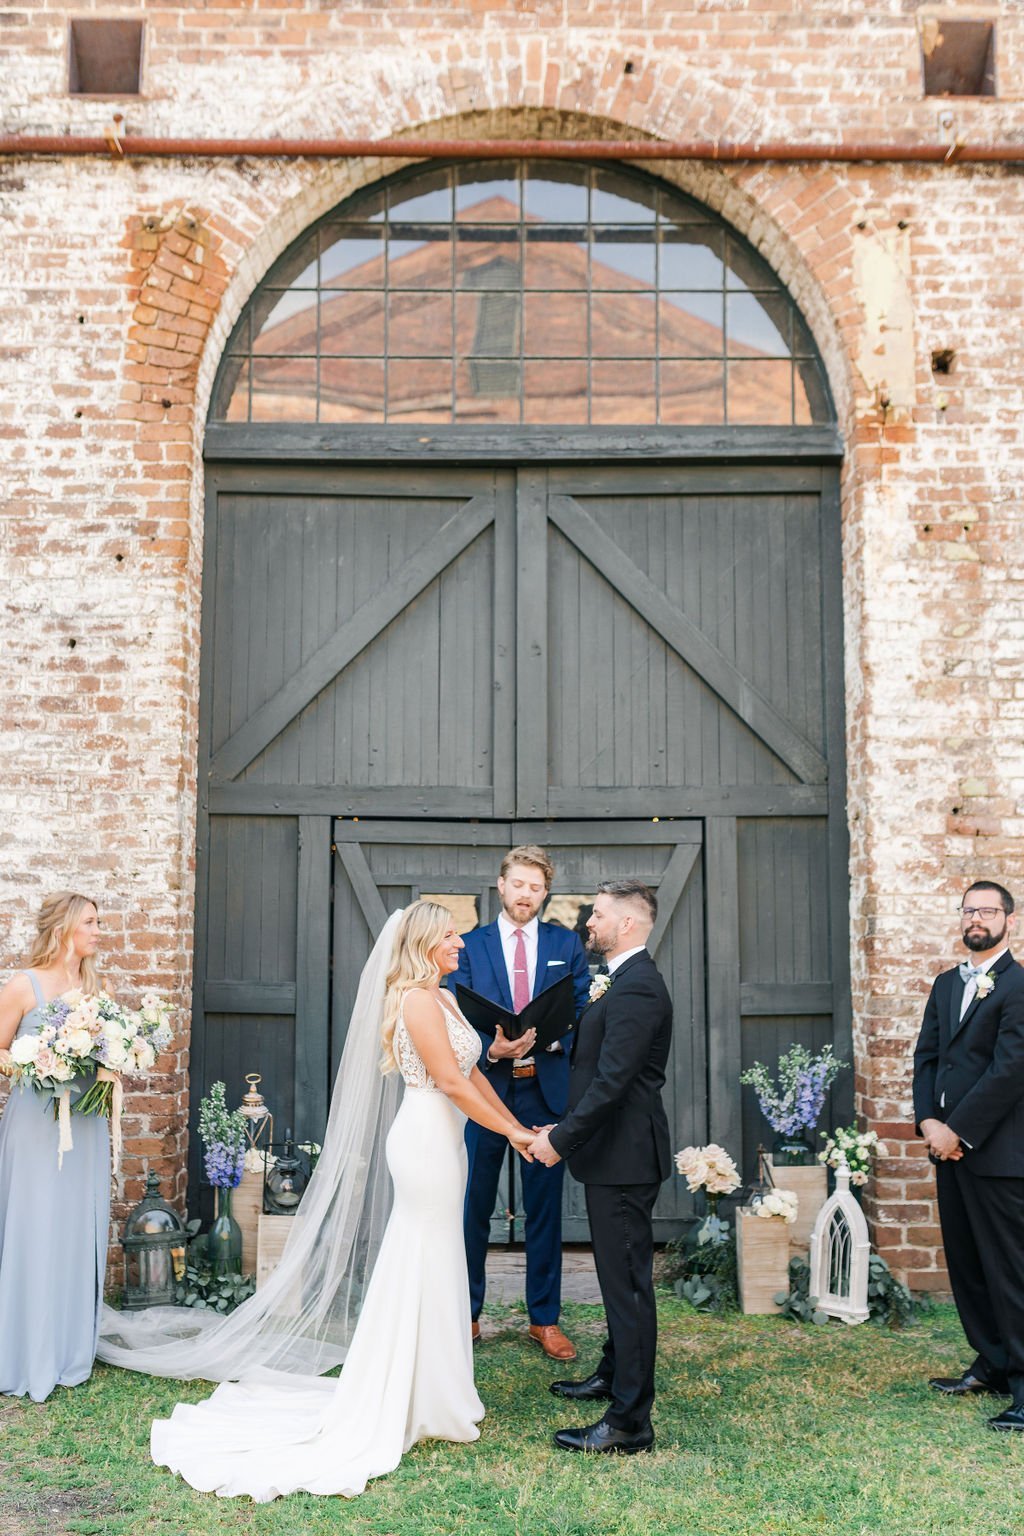 claudia-and-travis-romantic-southern-wedding-at-the-georgia-state-railroad-museum-in-savannah-georgia-planned-by-savannah-wedding-planner-and-savannah-florist-ivory-and-beau-15.jpg